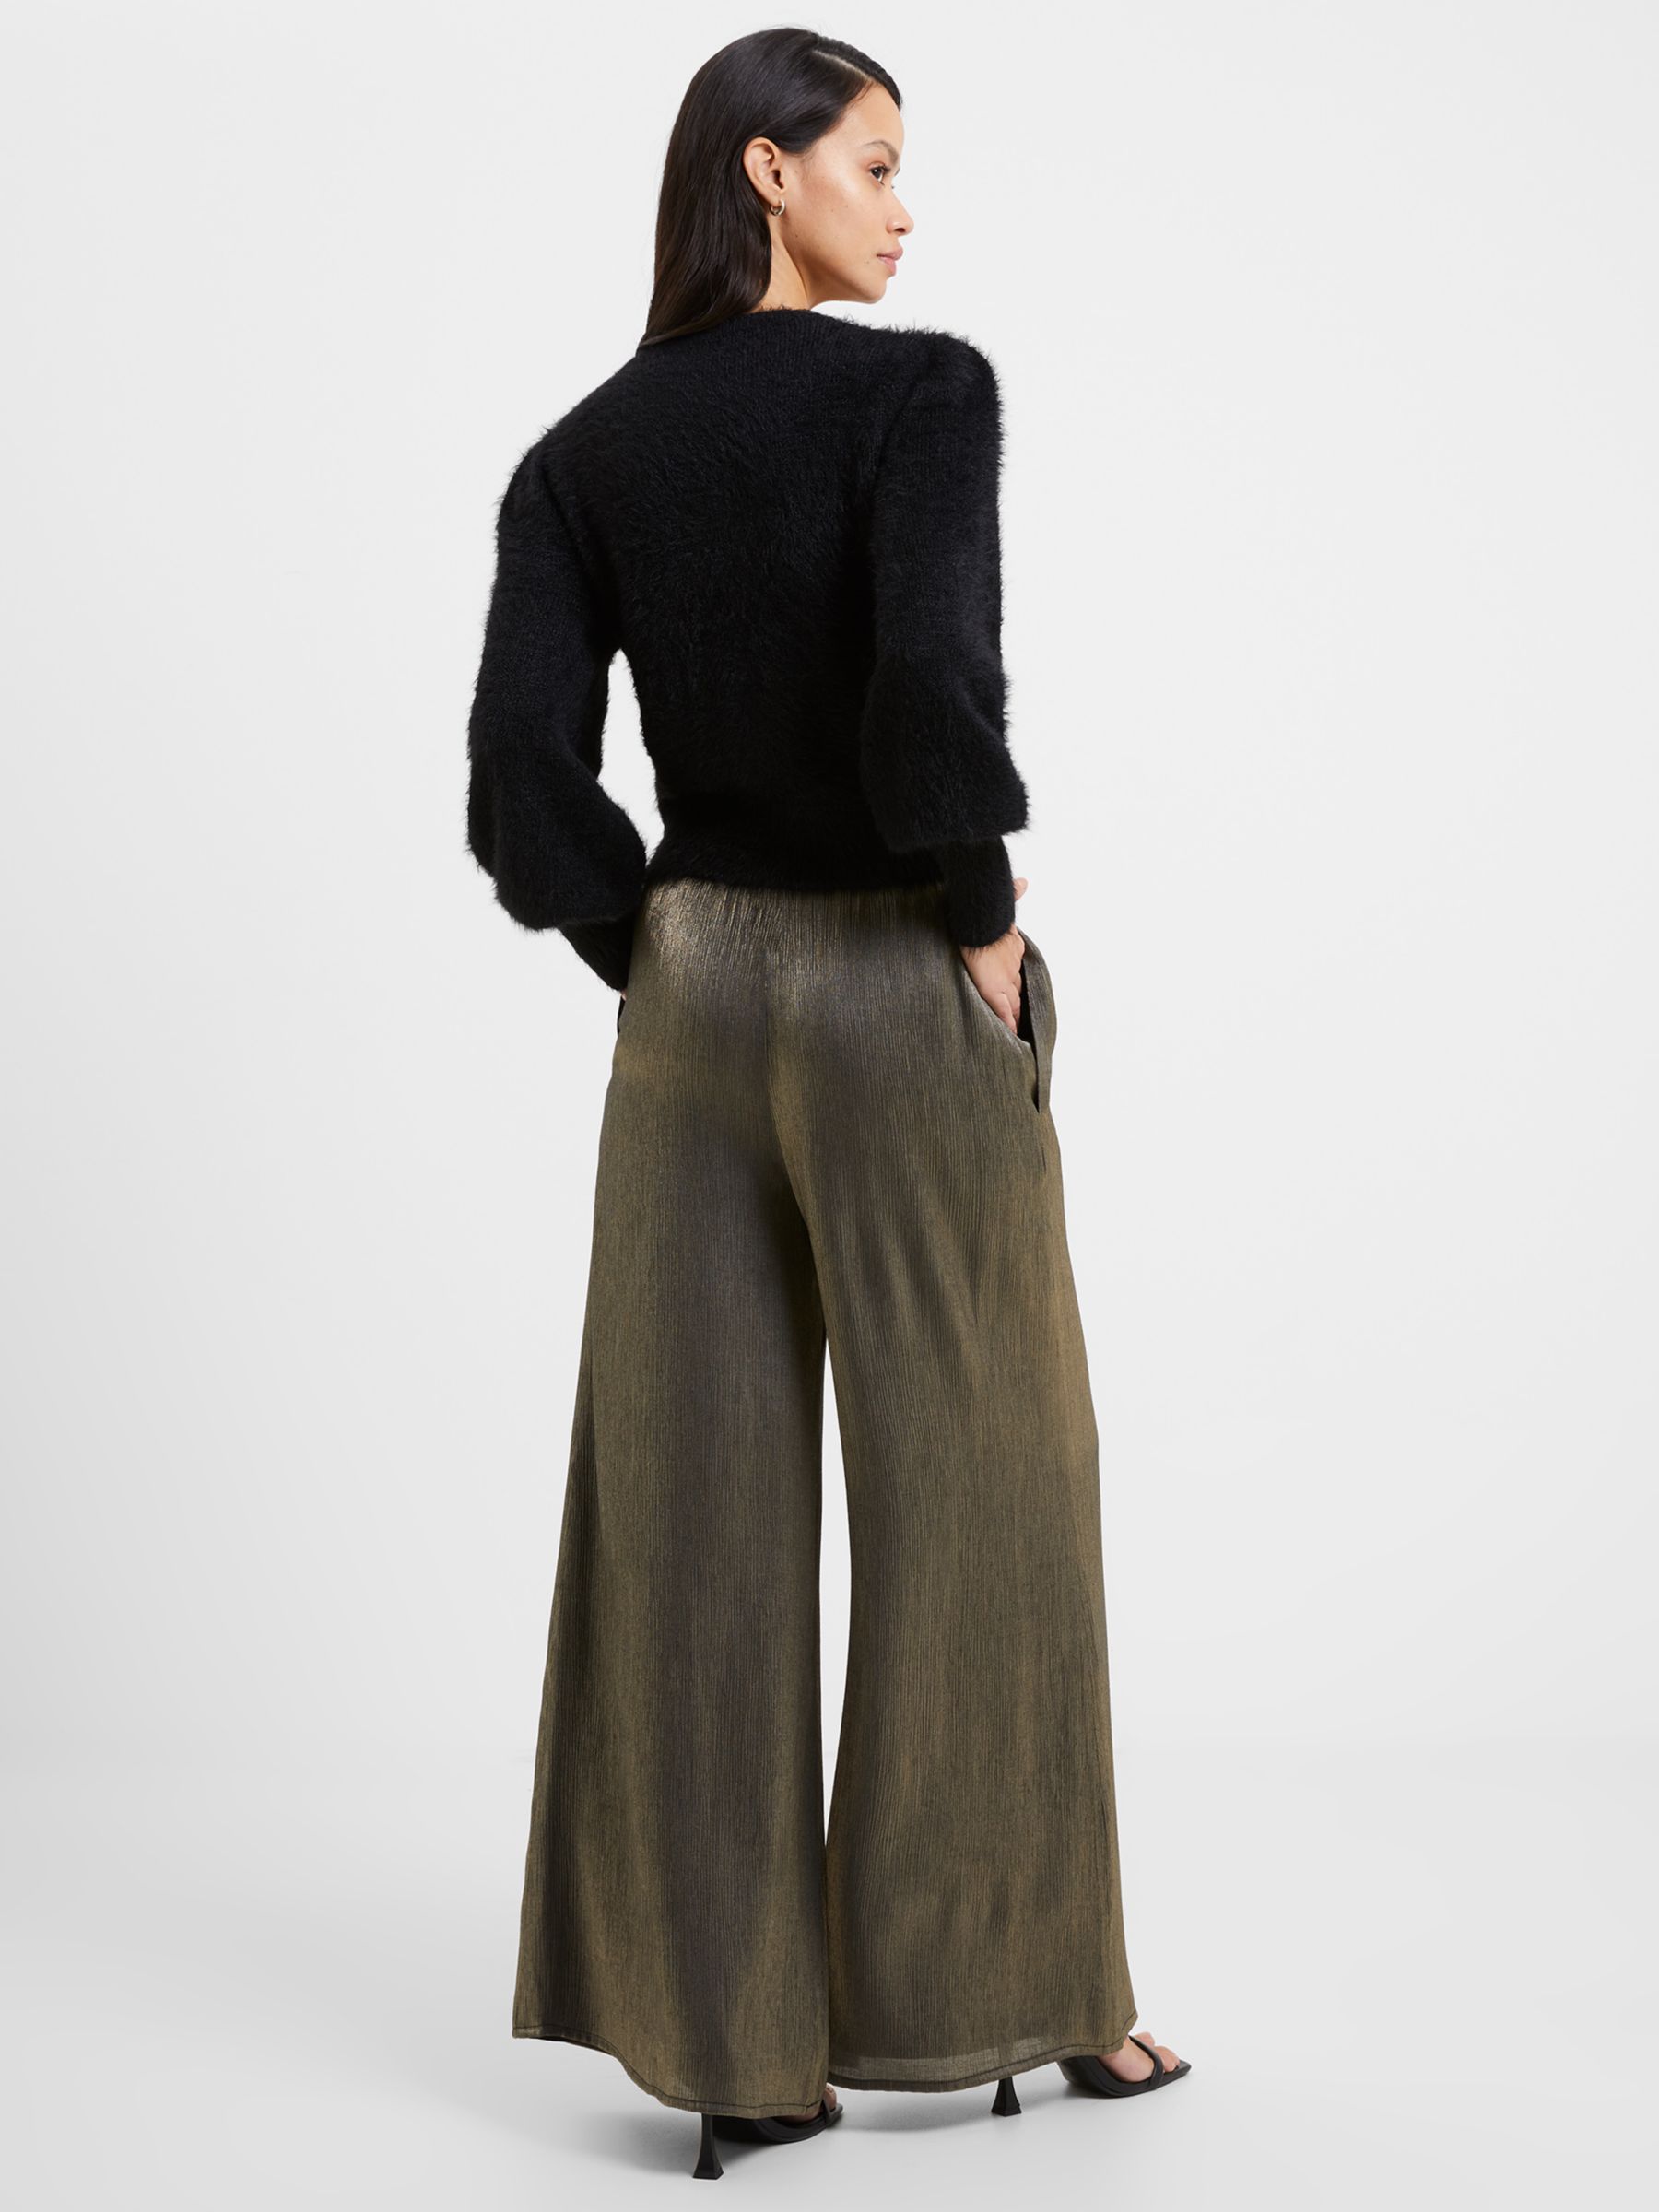 French Connection Dafne Metallic Wide Leg Trousers, Shine, M